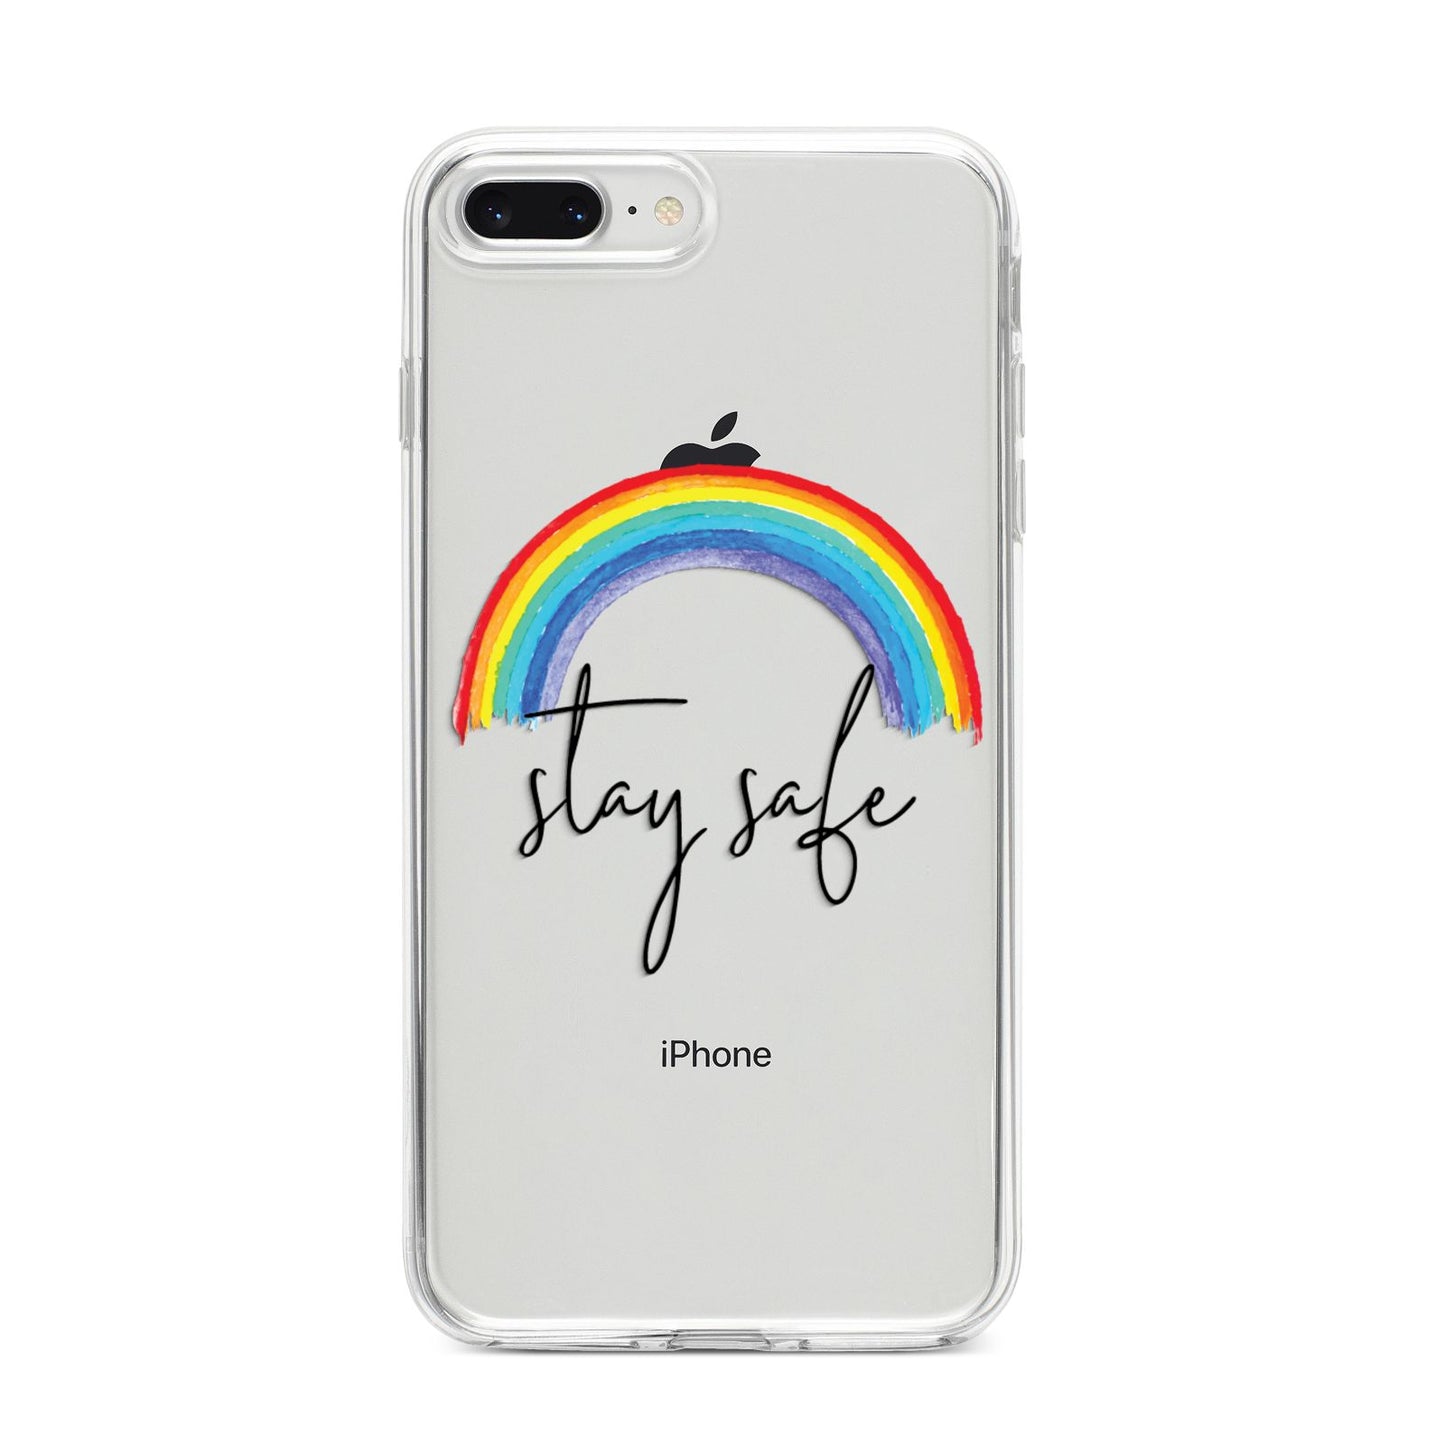 Stay Safe Rainbow iPhone 8 Plus Bumper Case on Silver iPhone